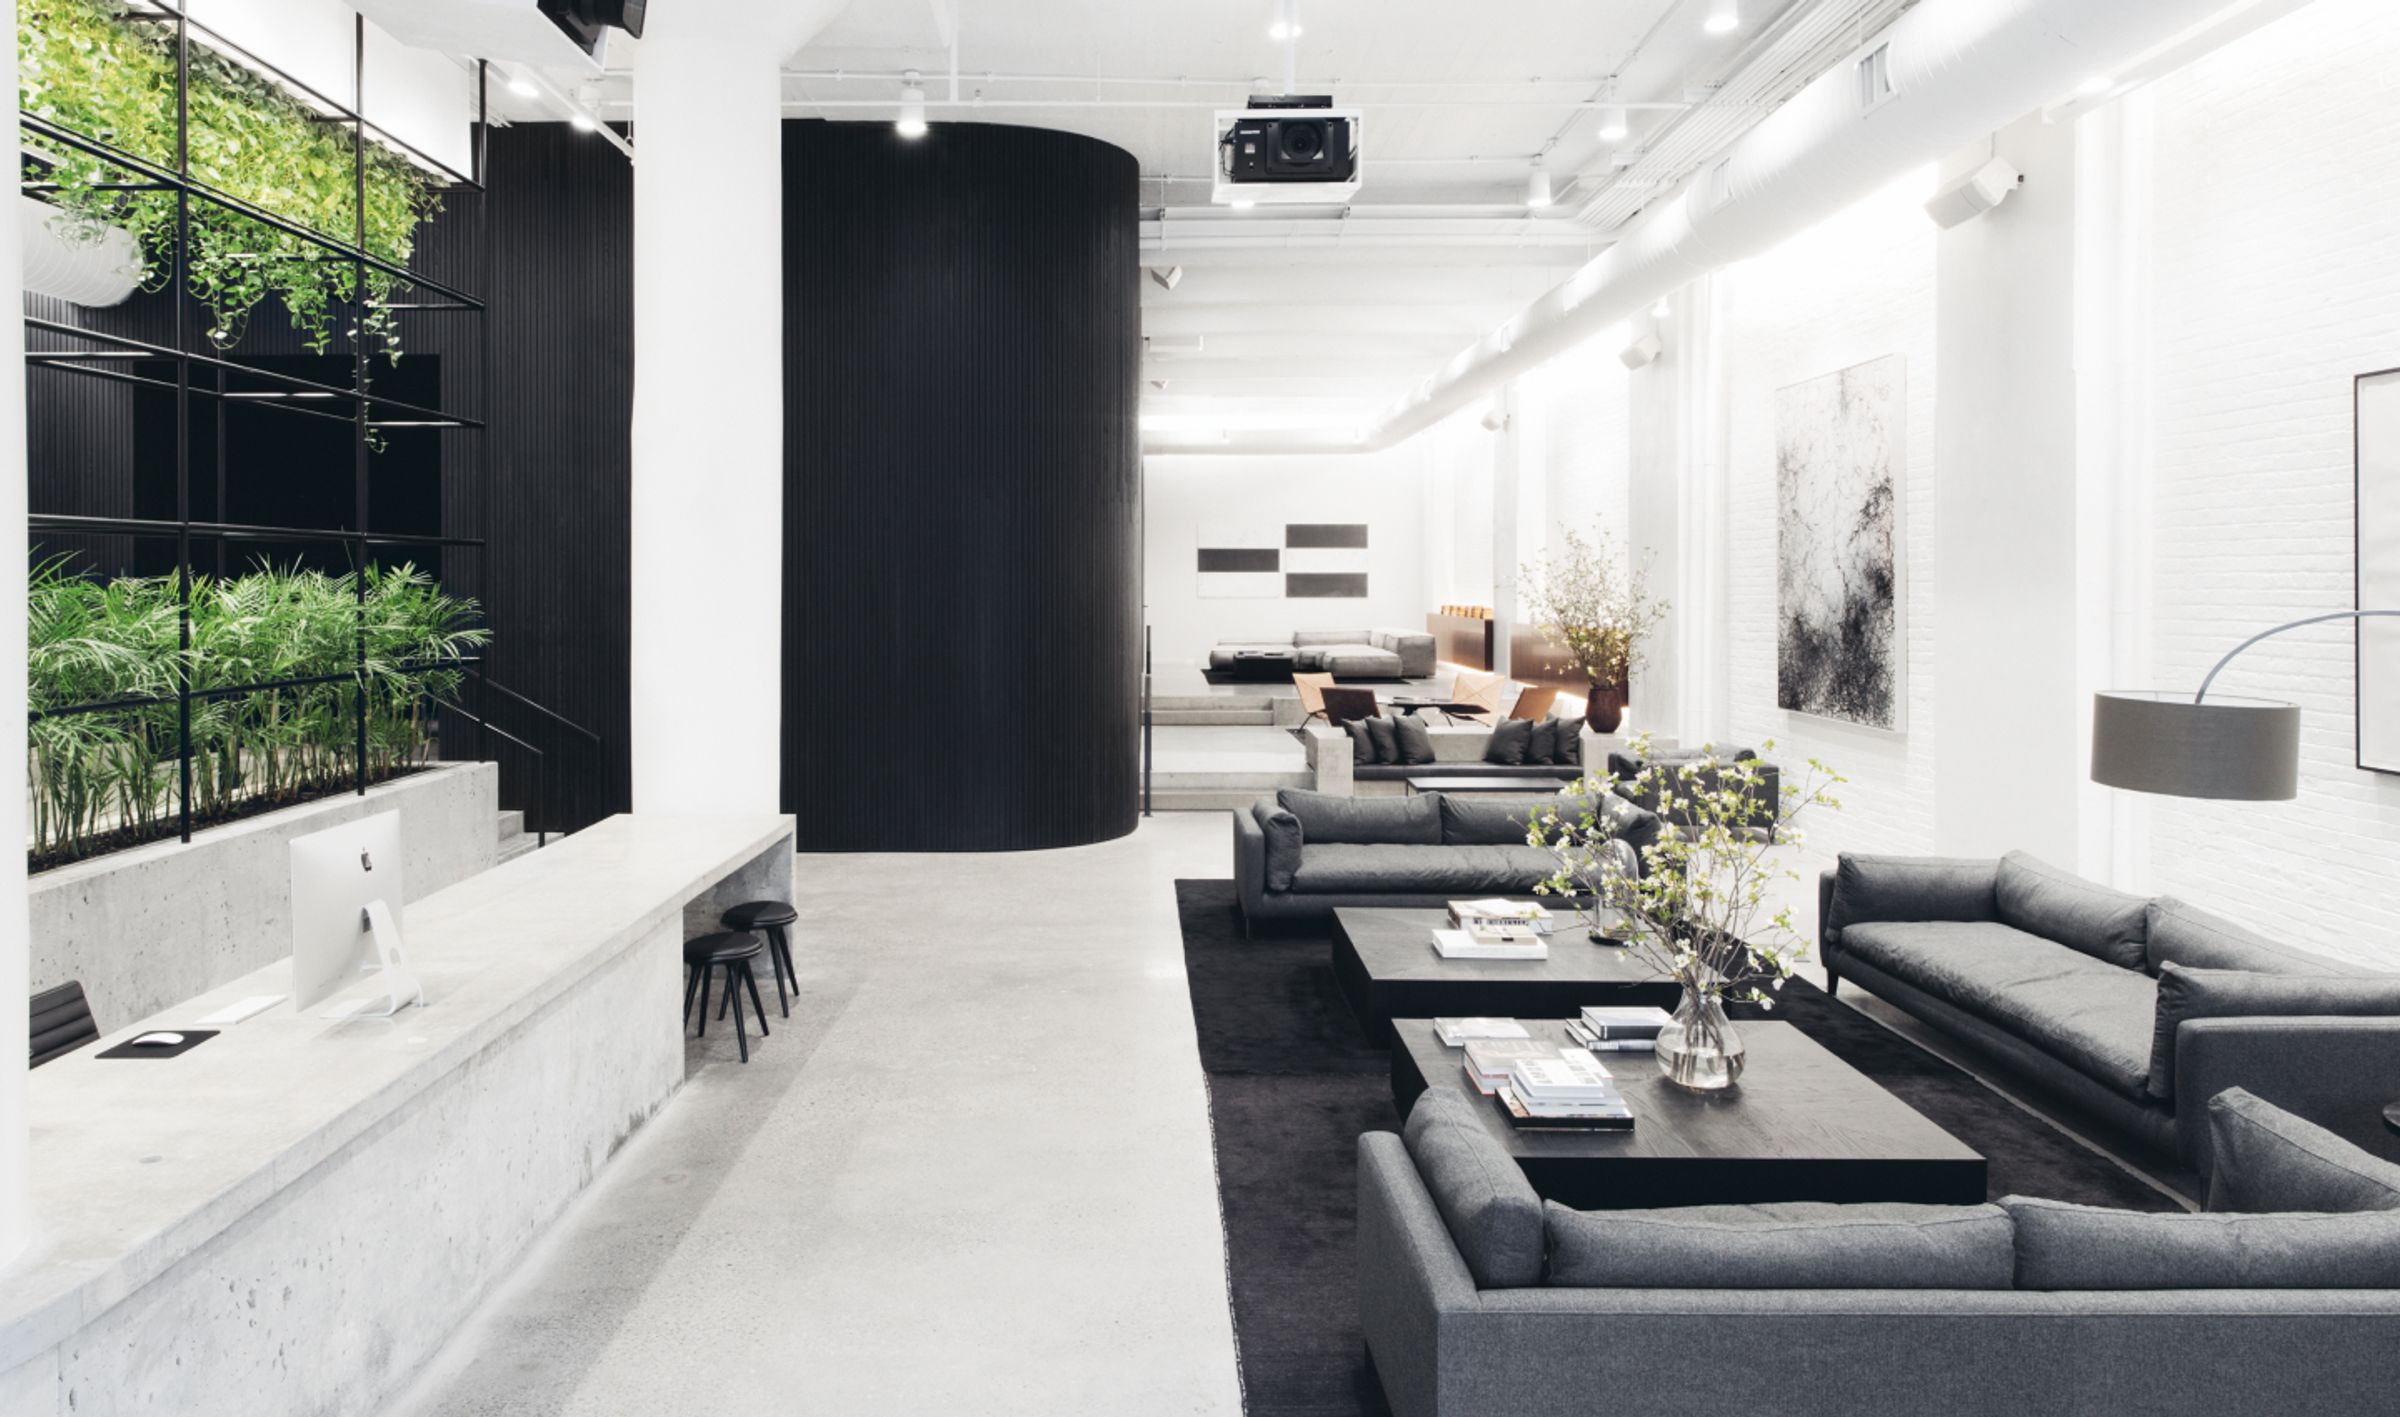 The lobby of Squarespace's New York office